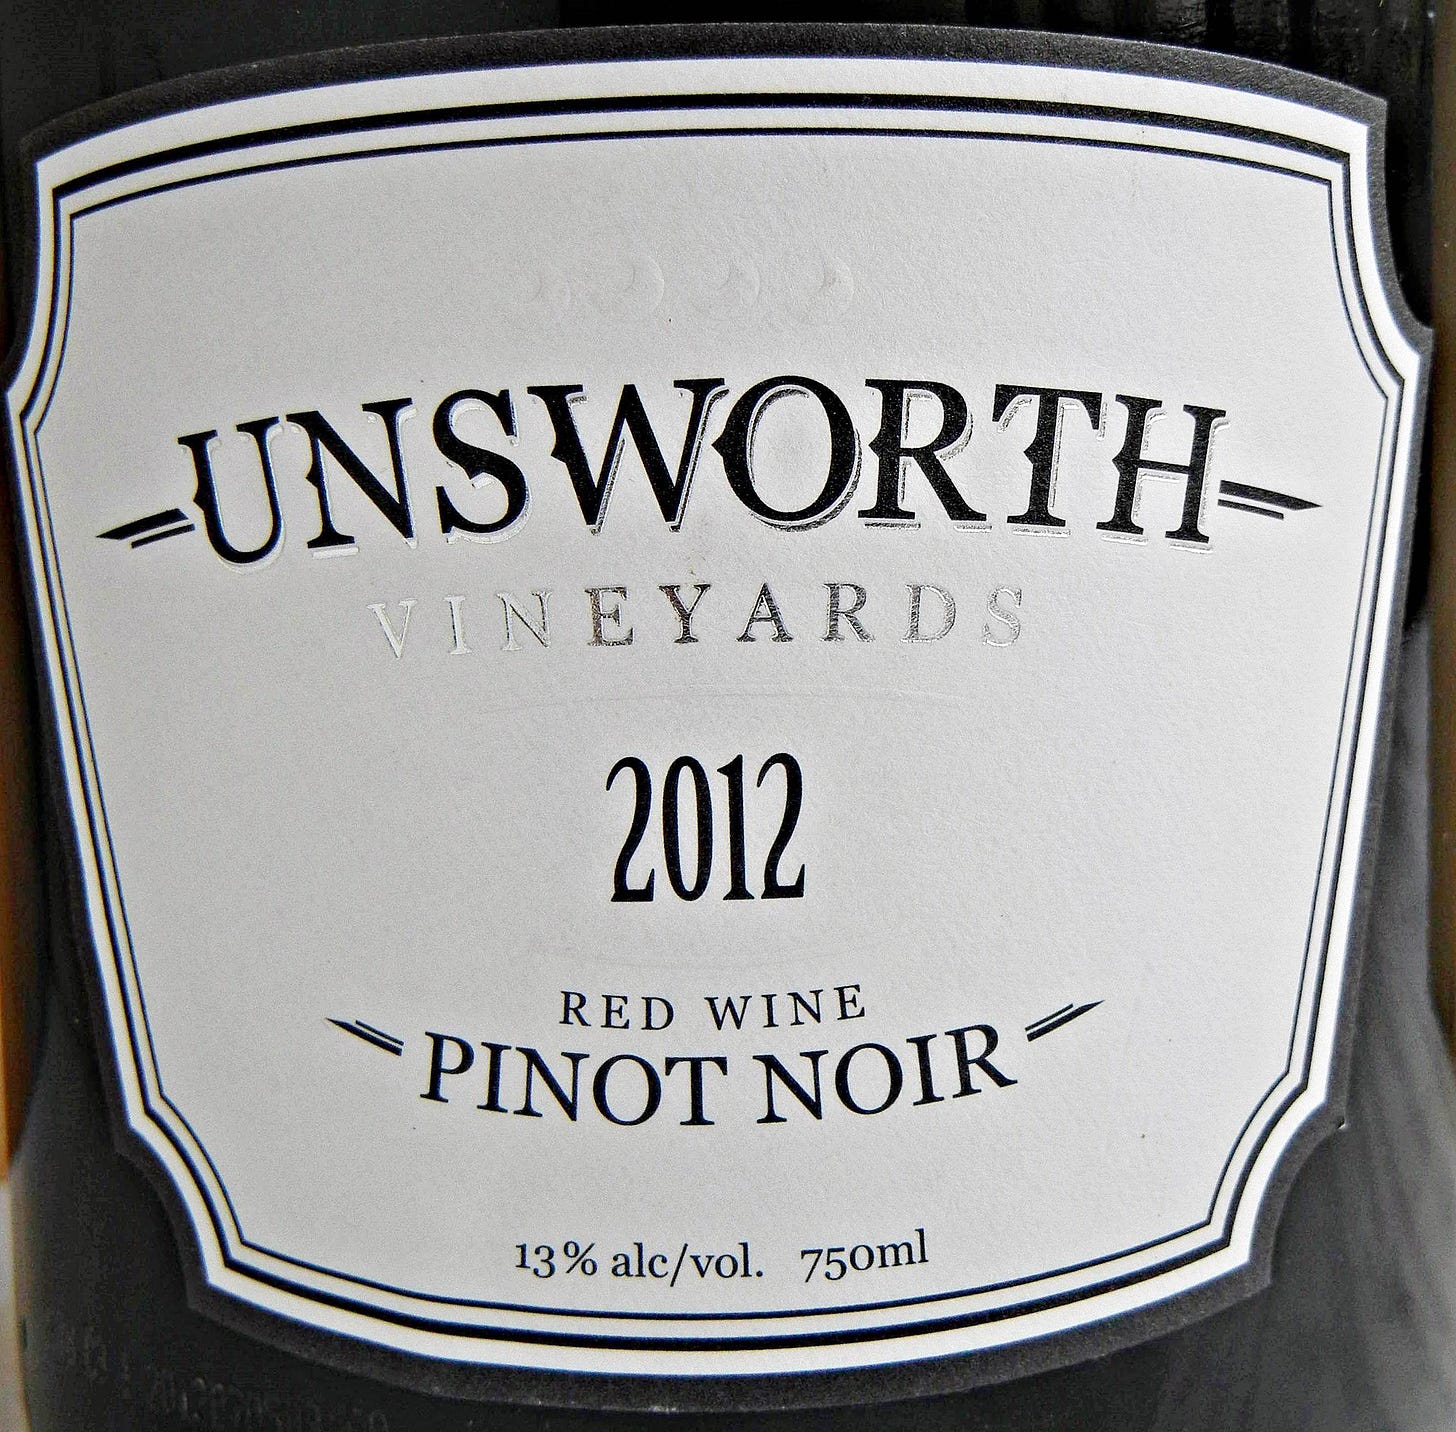 Unsworth Pinot Noir 2012 Label - BC Pinot Noir Tasting Review 18